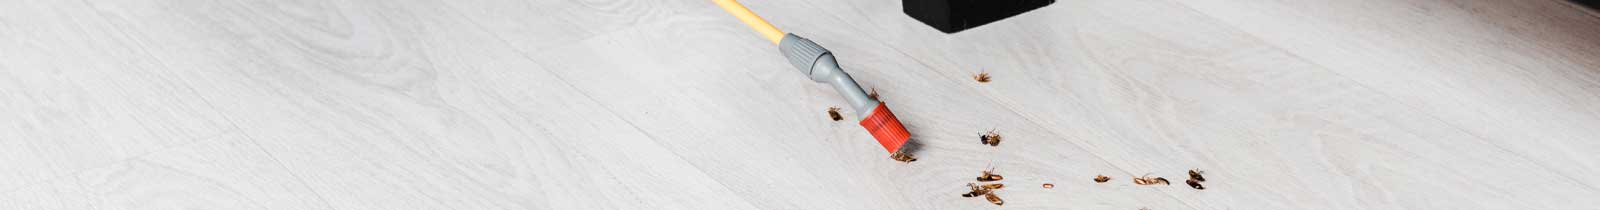 tips-for-keeping-cockroaches-out-of-your-nashville-home nashville, tn